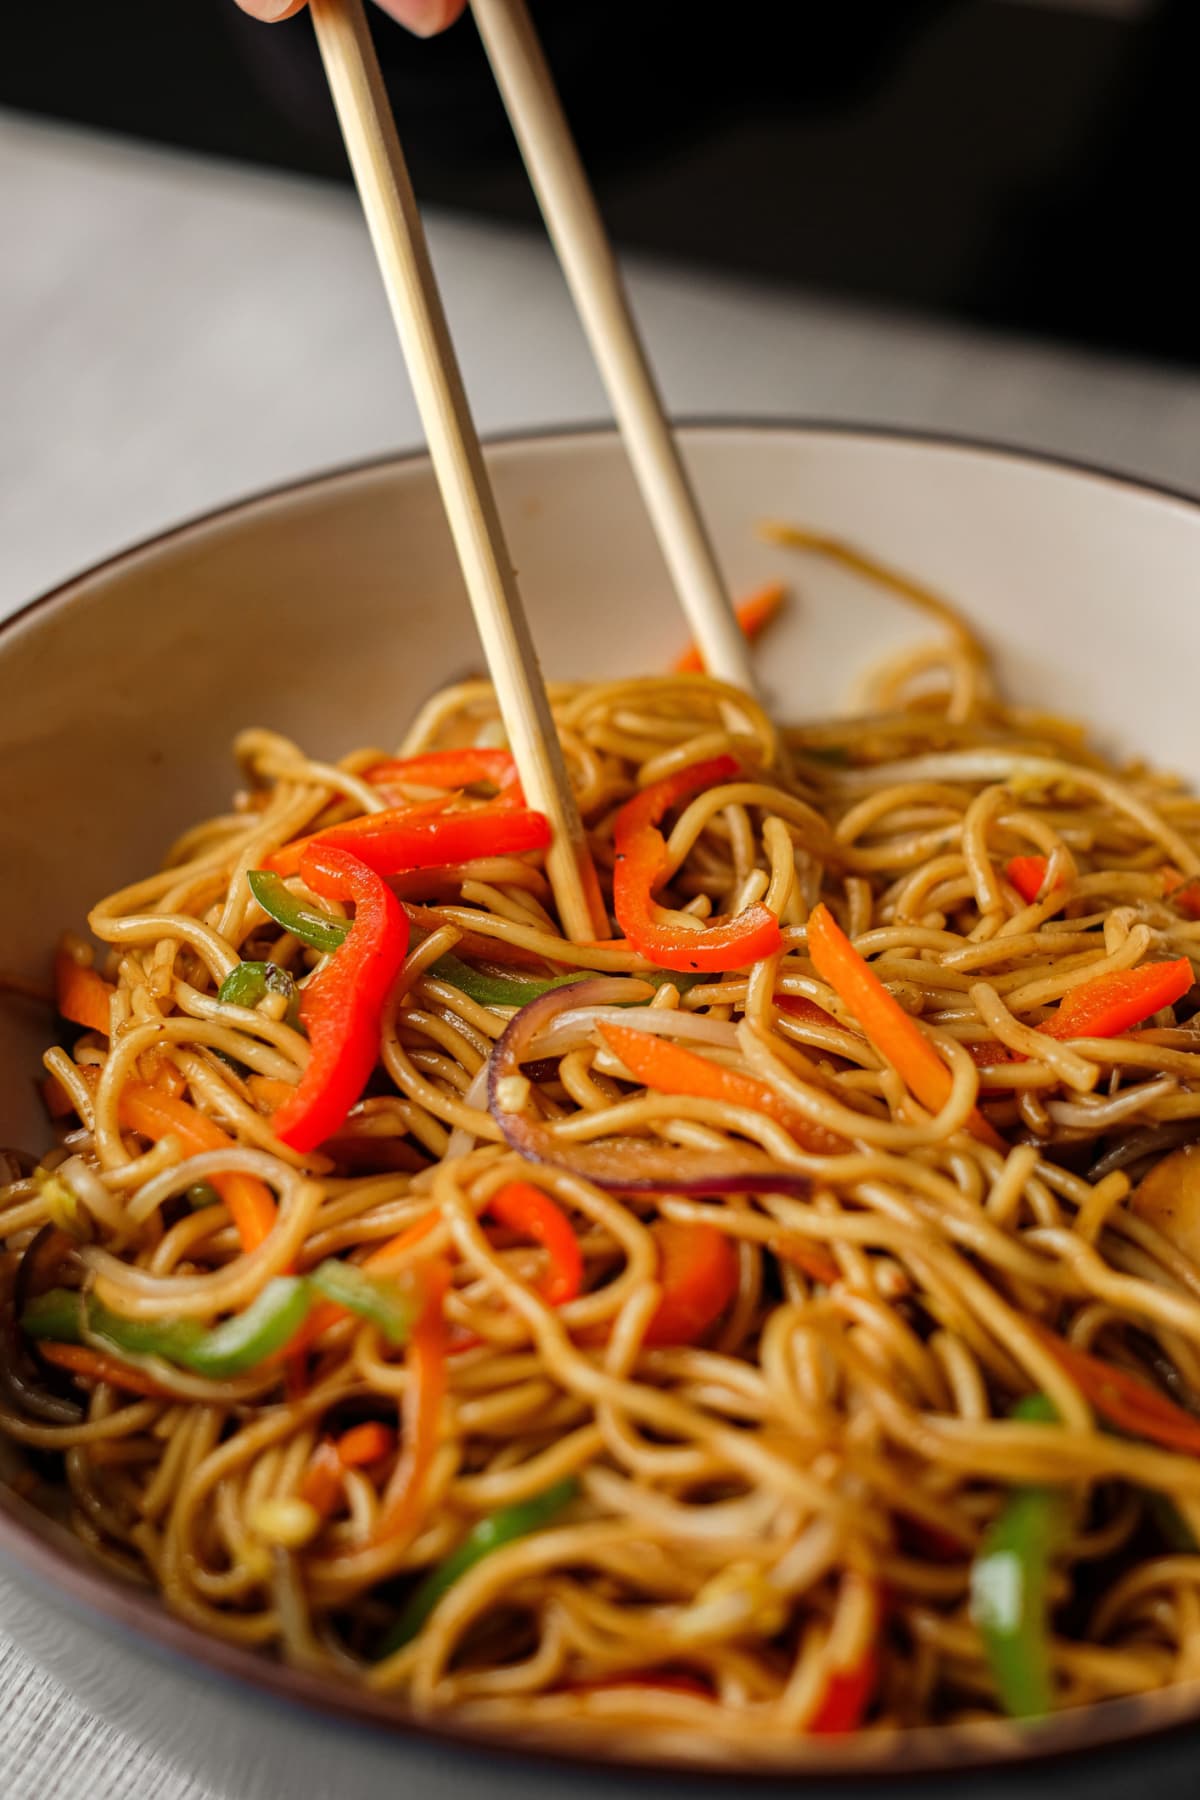 Chow mein, noodles and vegetables dish with wooden chopsticks.